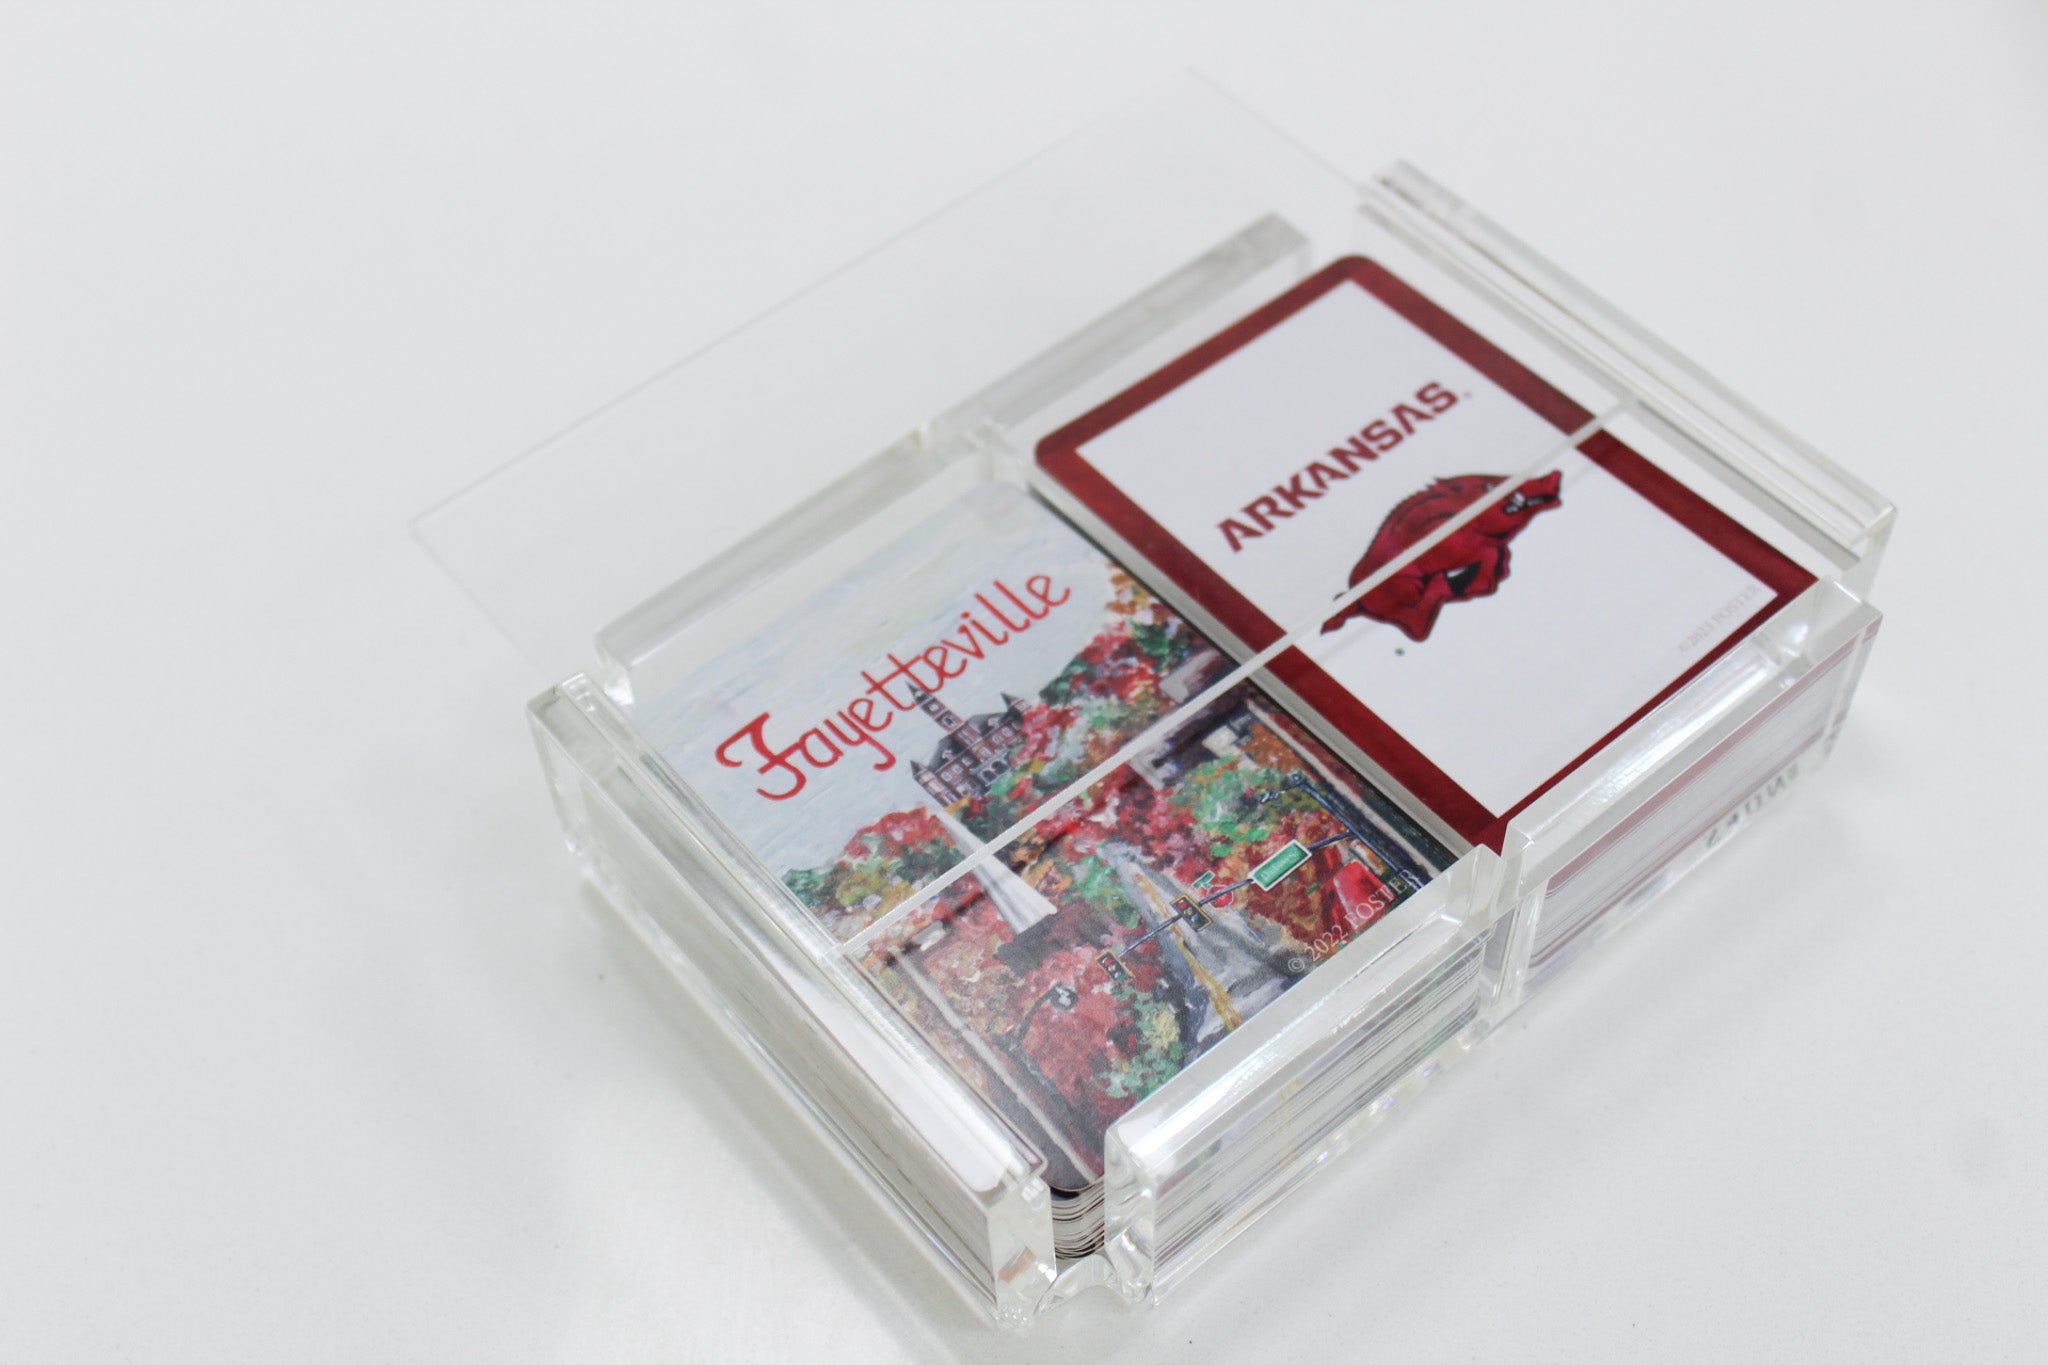 Fayetteville, Arkansas and University of Arkansas Playing Cards in a clear acrylic card case.